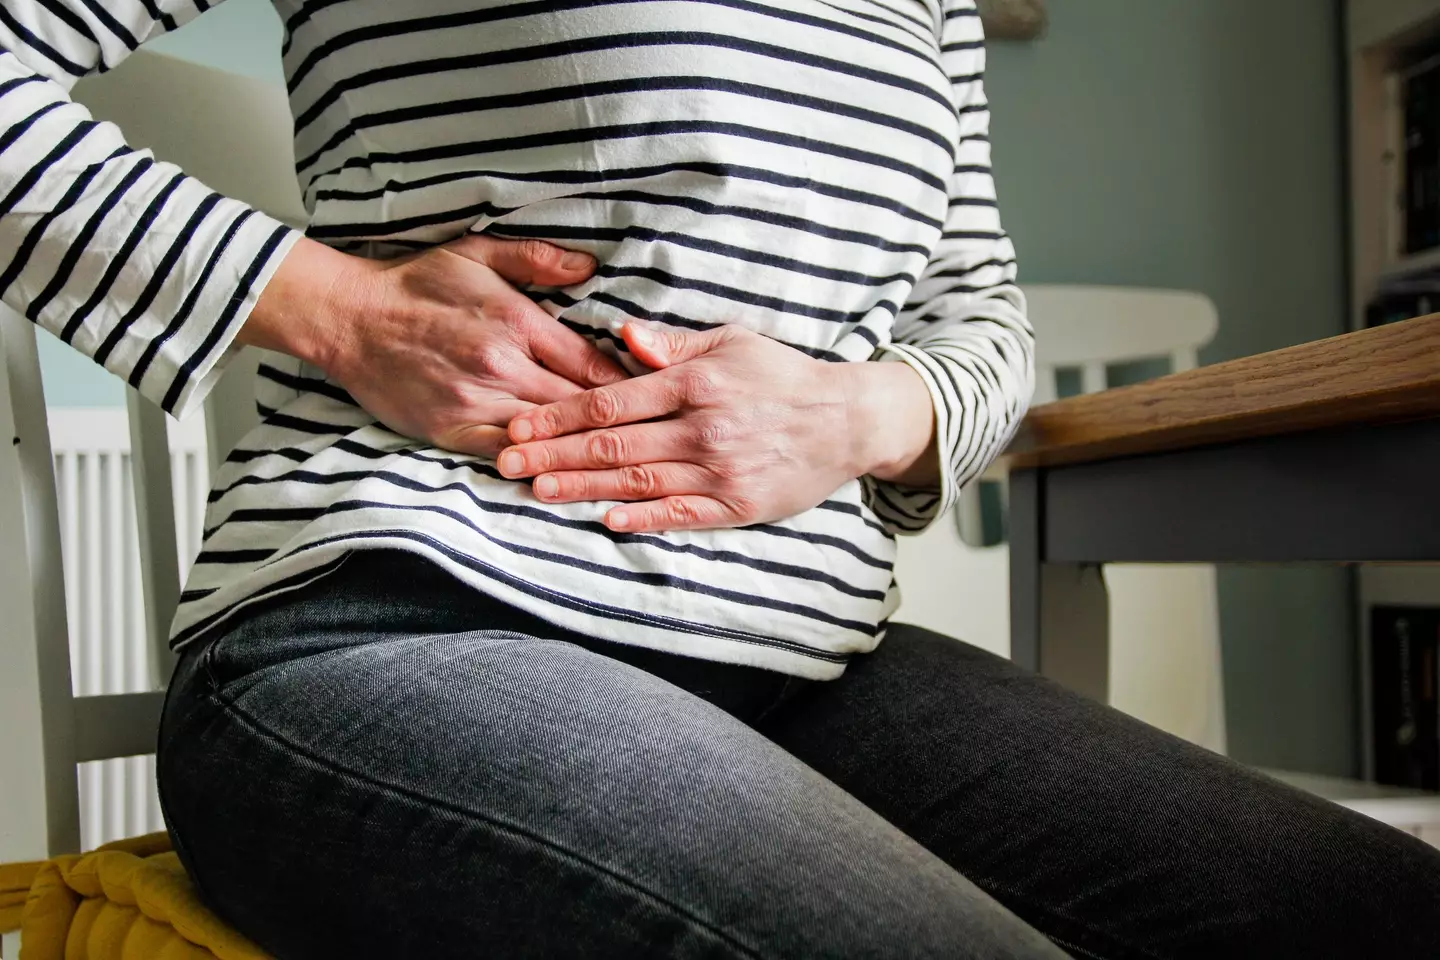 Women have been advised that pain in the lower abdomen may be a symptom. (Getty Stock Image)